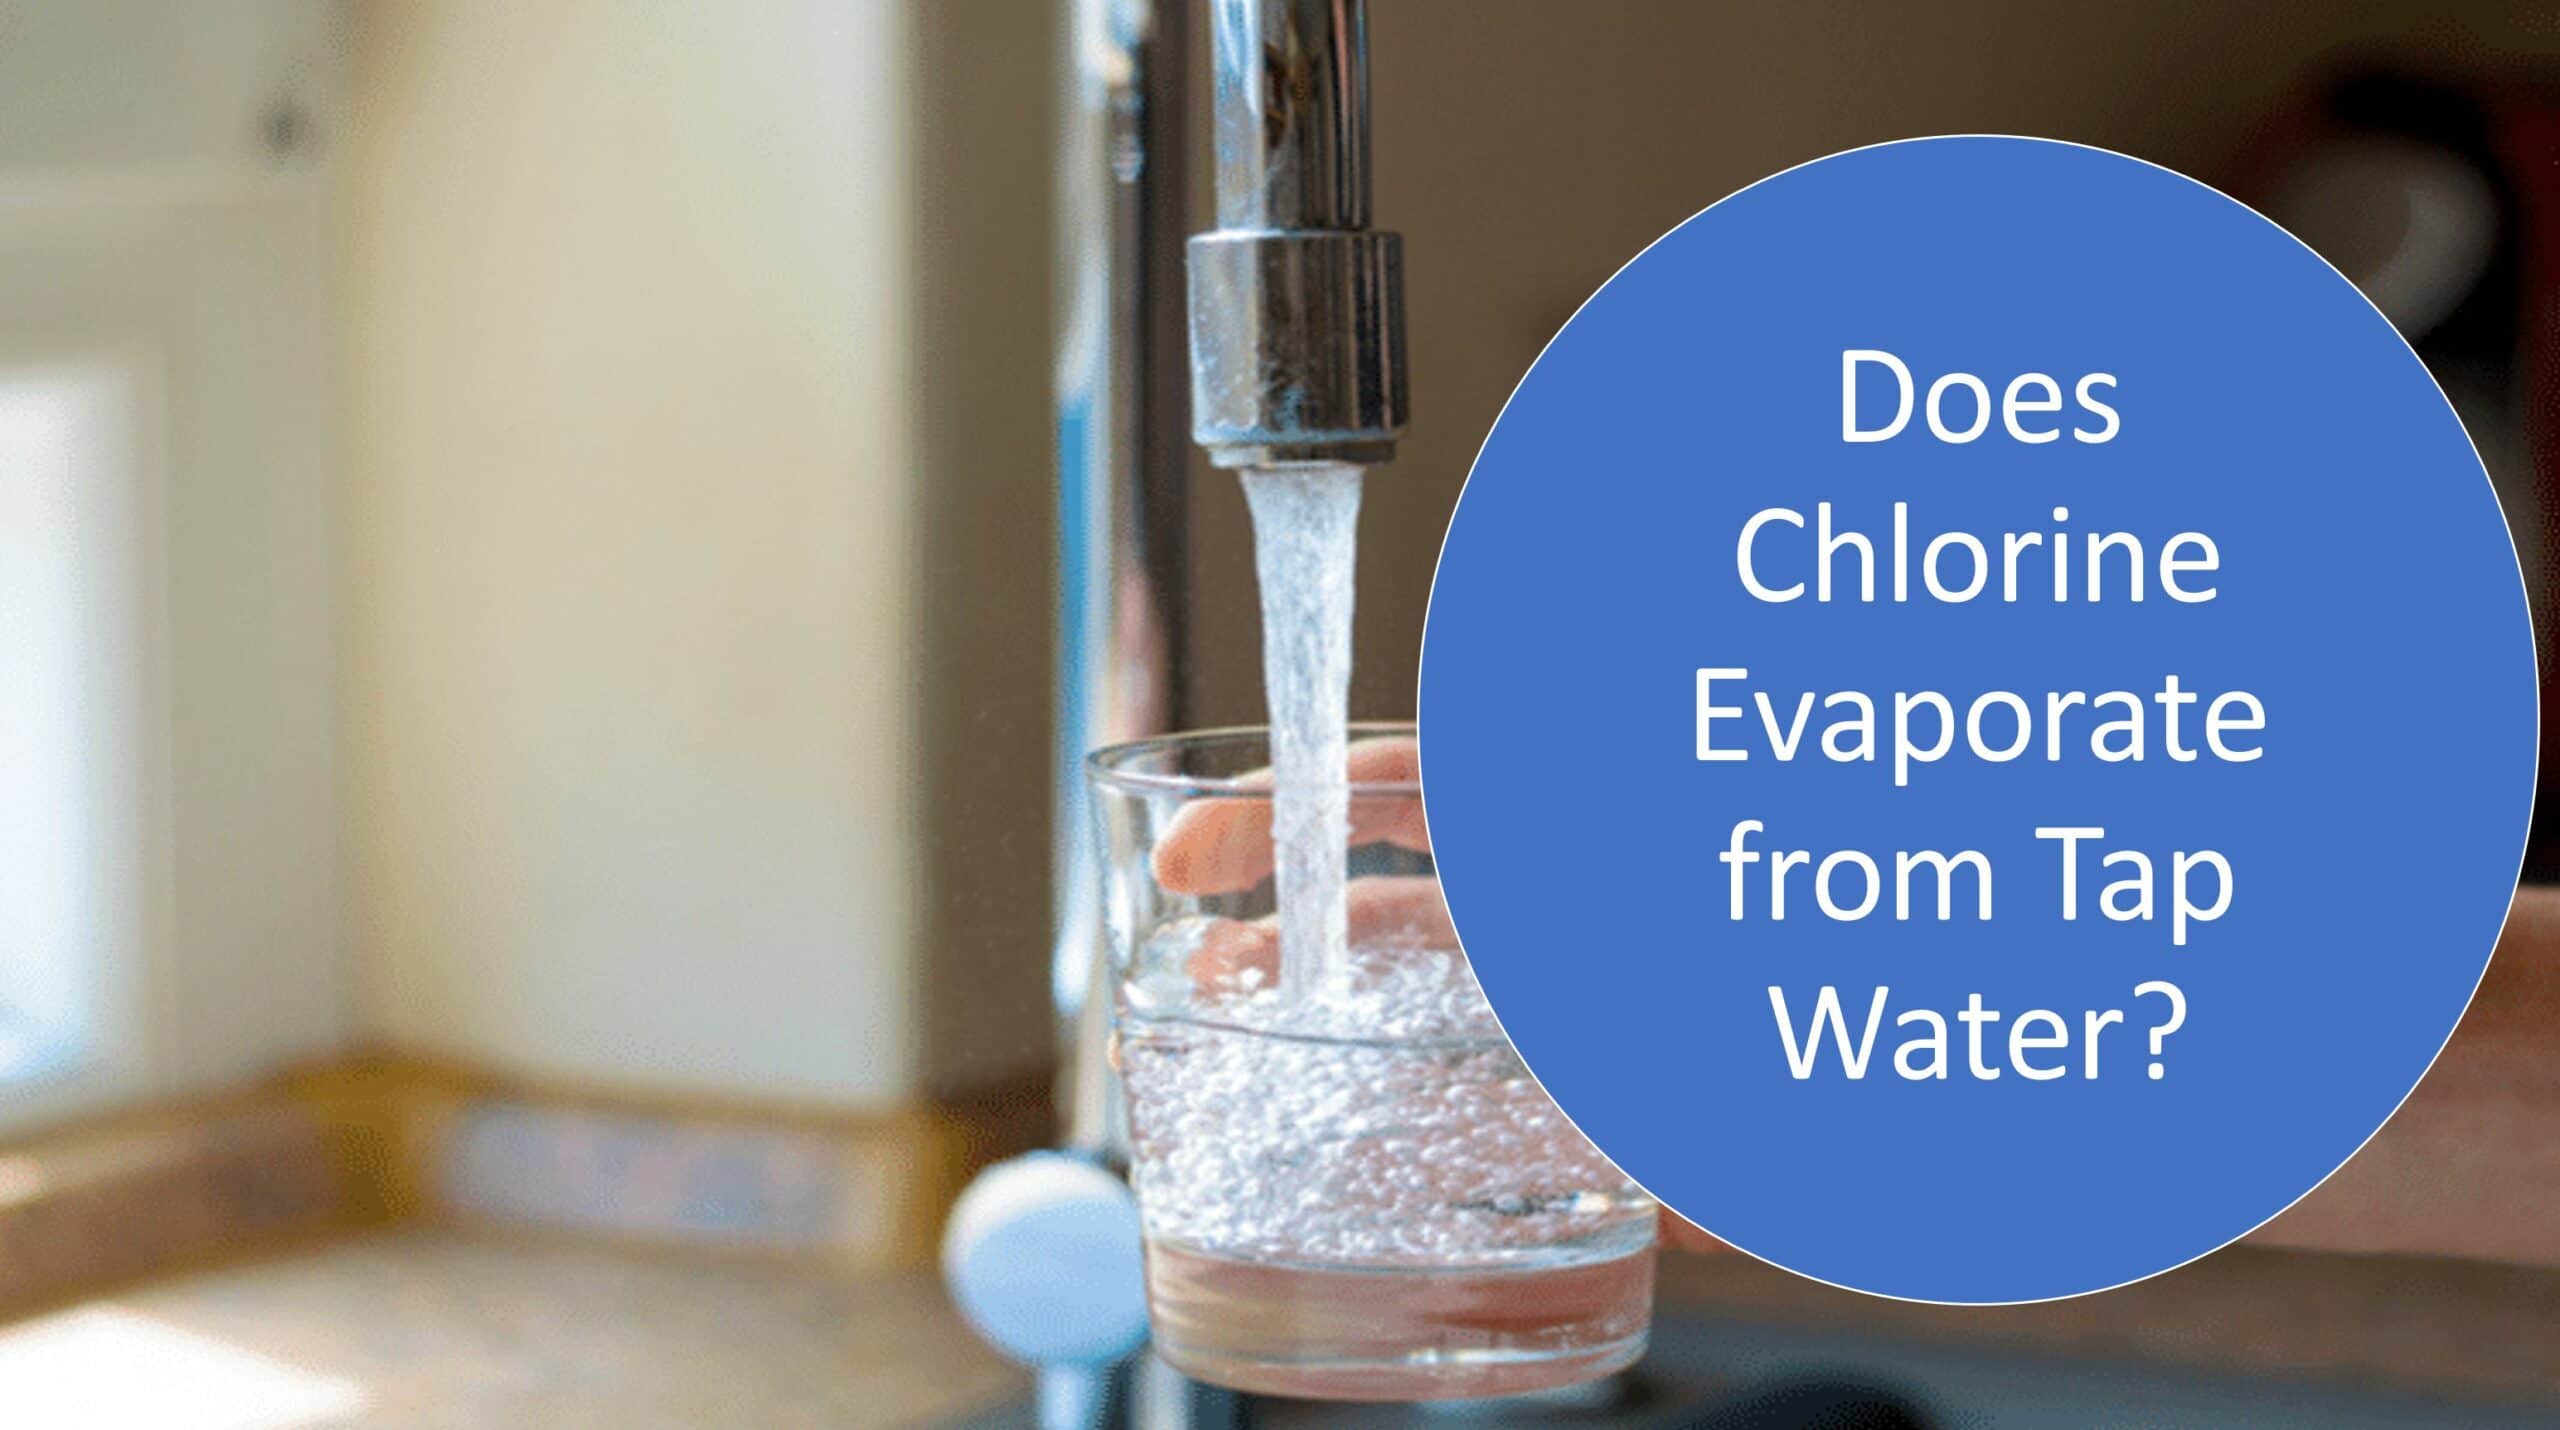 Does Chlorine Evaporate From Tap Water?